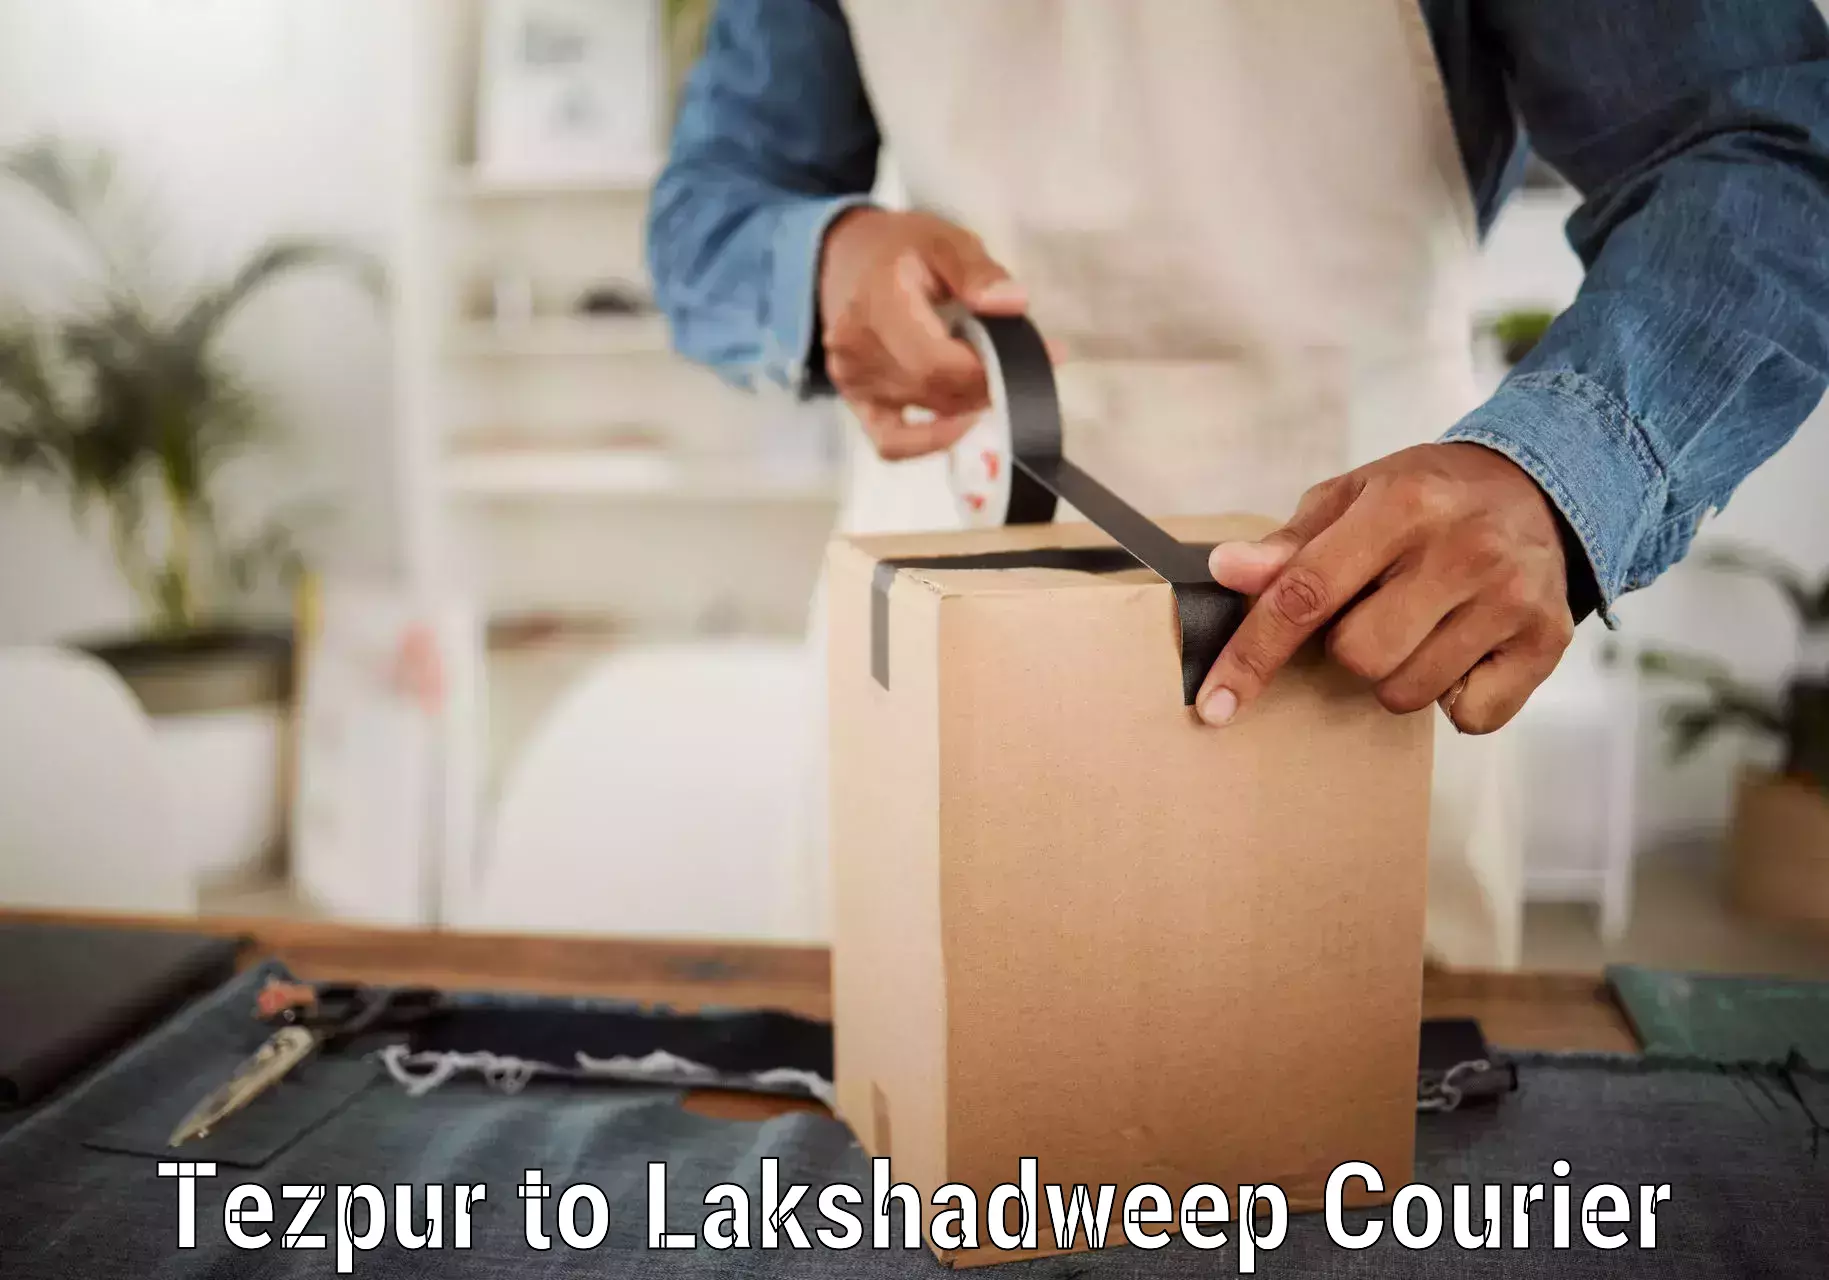 Cash on delivery service Tezpur to Lakshadweep